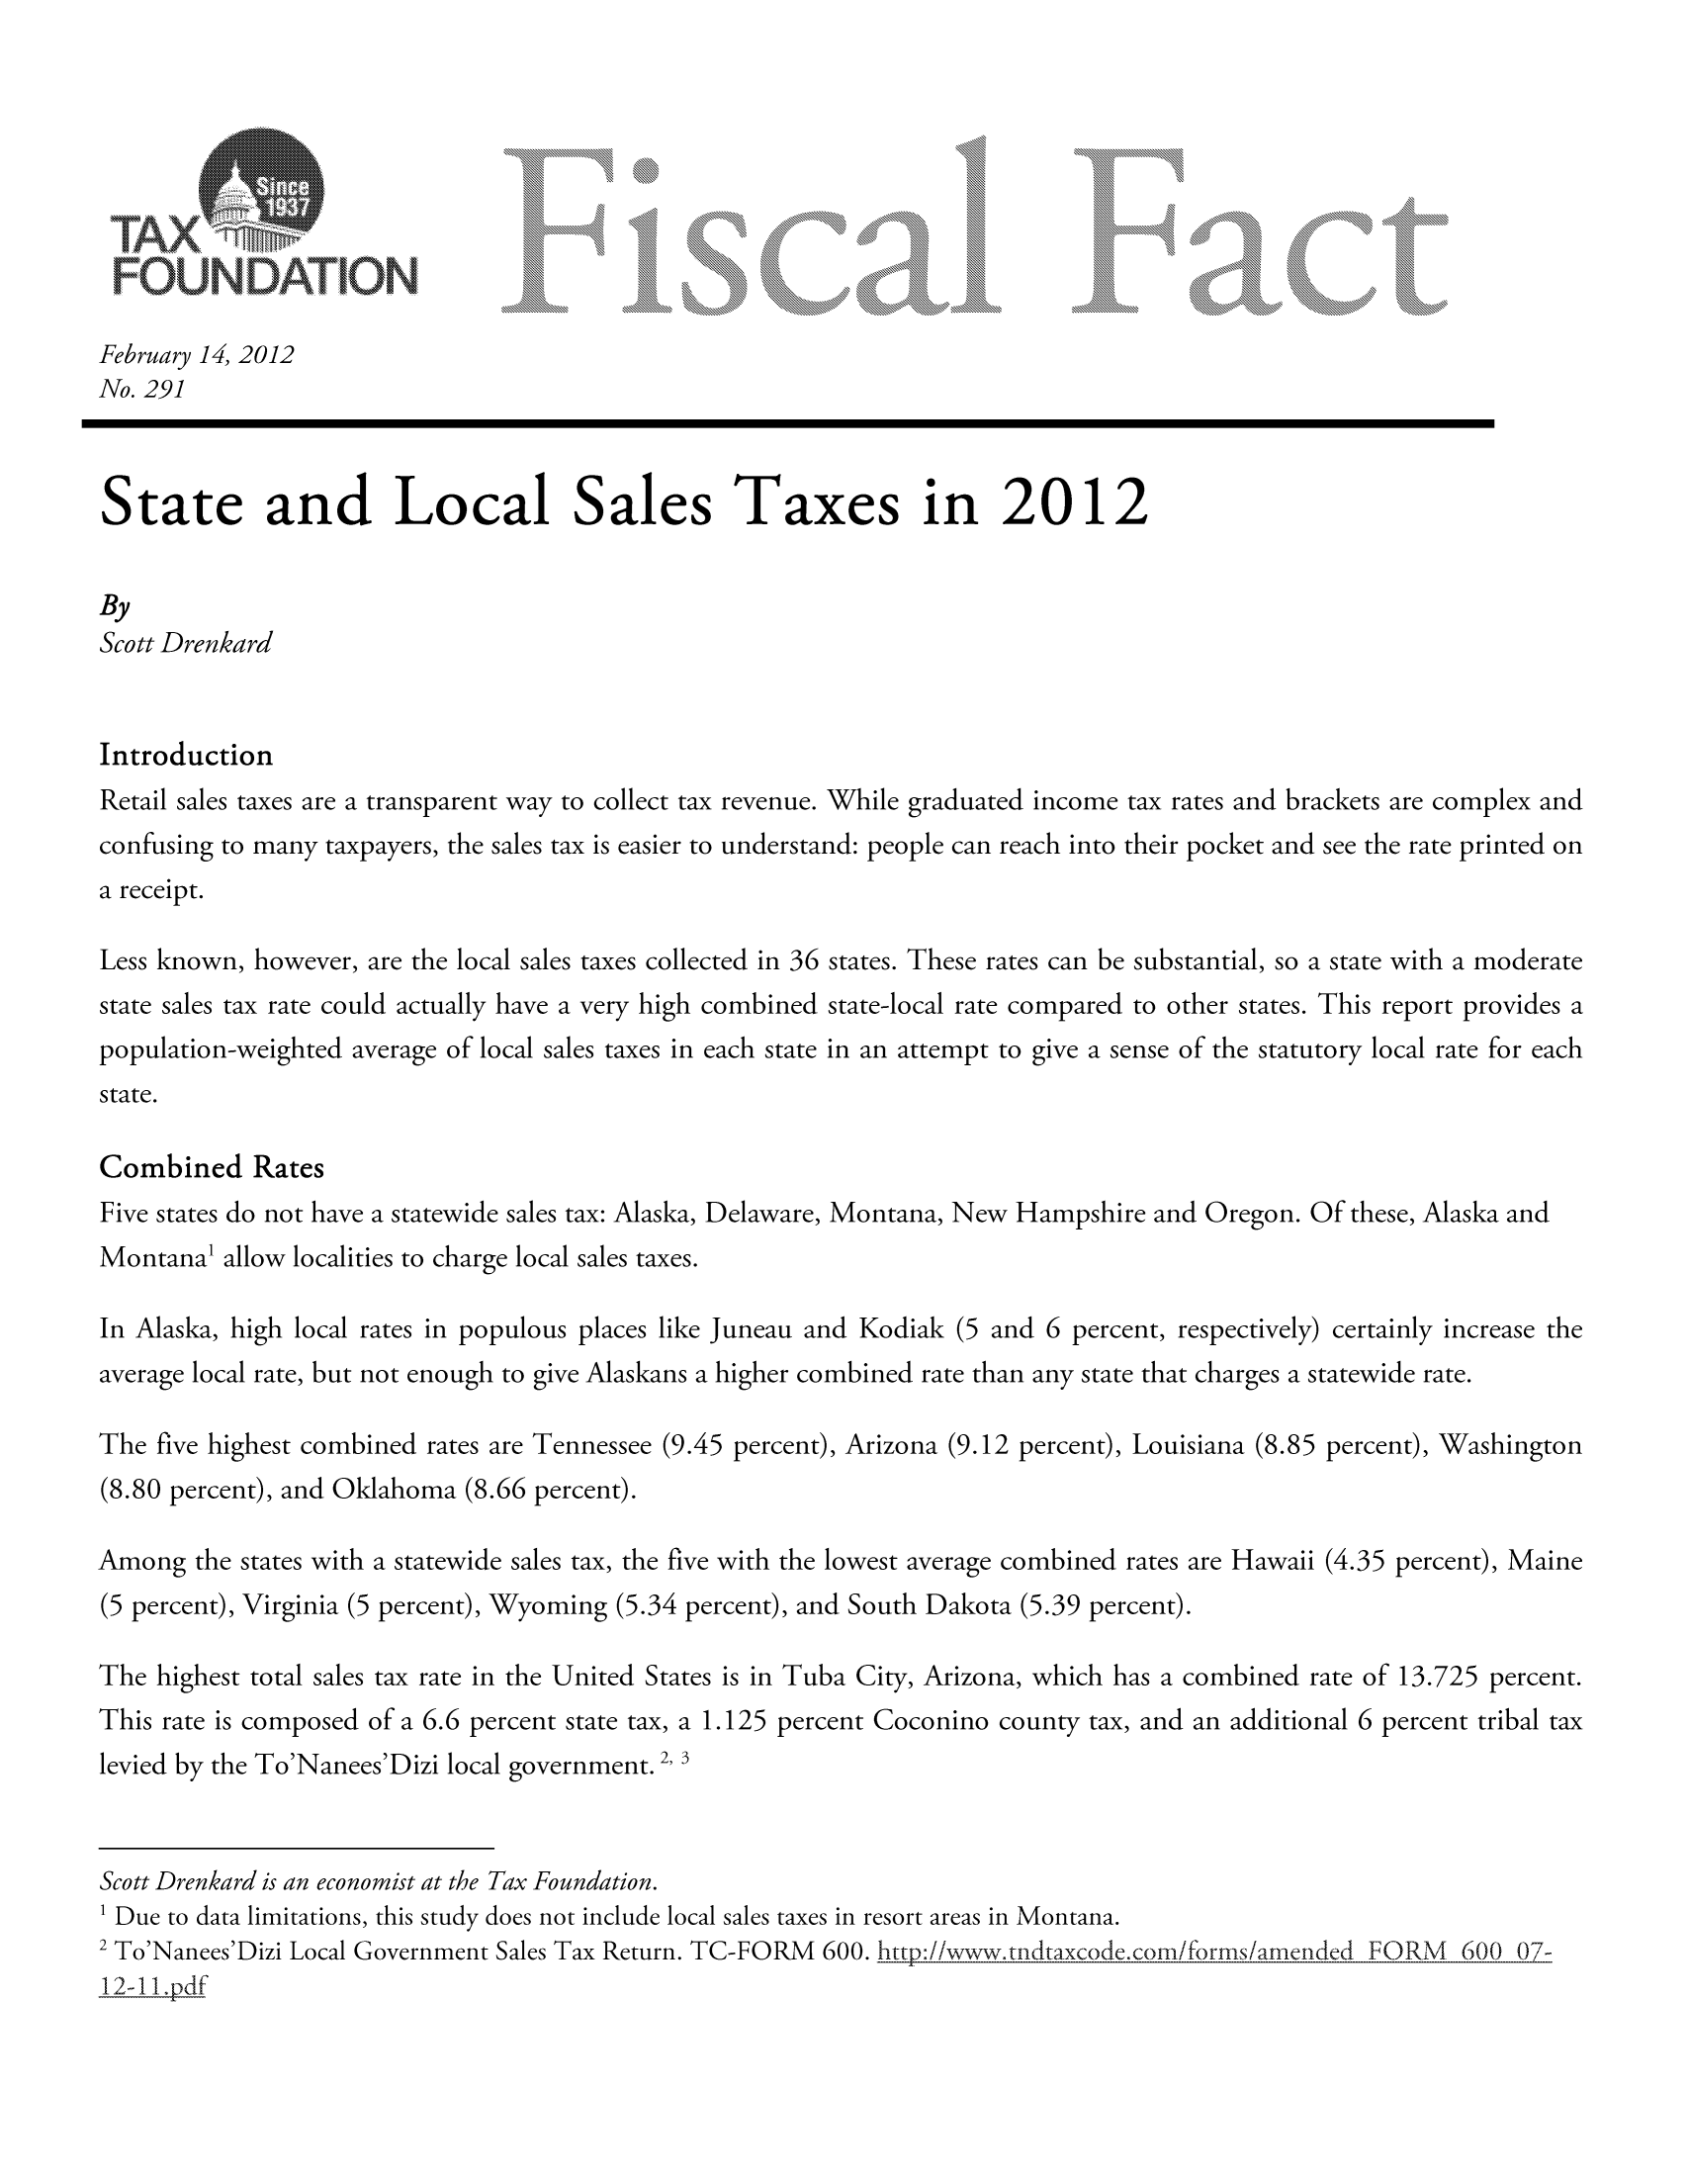 handle is hein.taxfoundation/ffcjbxz0001 and id is 1 raw text is: February 14, 2012
No. 291
State and Local Sales Taxes in 2012
By
Scott Drenkard
Introduction
Retail sales taxes are a transparent way to collect tax revenue. While graduated income tax rates and brackets are complex and
confusing to many taxpayers, the sales tax is easier to understand: people can reach into their pocket and see the rate printed on
a receipt.
Less known, however, are the local sales taxes collected in 36 states. These rates can be substantial, so a state with a moderate
state sales tax rate could actually have a very high combined state-local rate compared to other states. This report provides a
population-weighted average of local sales taxes in each state in an attempt to give a sense of the statutory local rate for each
state.
Combined Rates
Five states do not have a statewide sales tax: Alaska, Delaware, Montana, New Hampshire and Oregon. Of these, Alaska and
Montana' allow localities to charge local sales taxes.
In Alaska, high local rates in populous places like Juneau and Kodiak (5 and 6 percent, respectively) certainly increase the
average local rate, but not enough to give Alaskans a higher combined rate than any state that charges a statewide rate.
The five highest combined rates are Tennessee (9.45 percent), Arizona (9.12 percent), Louisiana (8.85 percent), Washington
(8.80 percent), and Oklahoma (8.66 percent).
Among the states with a statewide sales tax, the five with the lowest average combined rates are Hawaii (4.35 percent), Maine
(5 percent), Virginia (5 percent), Wyoming (5.34 percent), and South Dakota (5.39 percent).
The highest total sales tax rate in the United States is in Tuba City, Arizona, which has a combined rate of 13.725 percent.
This rate is composed of a 6.6 percent state tax, a 1.125 percent Coconino county tax, and an additional 6 percent tribal tax
levied by the To'Nanees'Dizi local government. 2, 3
Scott Drenkard is an economist at the Tax Foundation.
1 Due to data limitations, this study does not include local sales taxes in resort areas in Montana.
2 To'Nanees'Dizi Local Government Sales Tax Return. TG-FORN/ 600. http:iiwwwtndtaxcodecomi/forrns/amended FORM 600 07:

12-11.pdf


